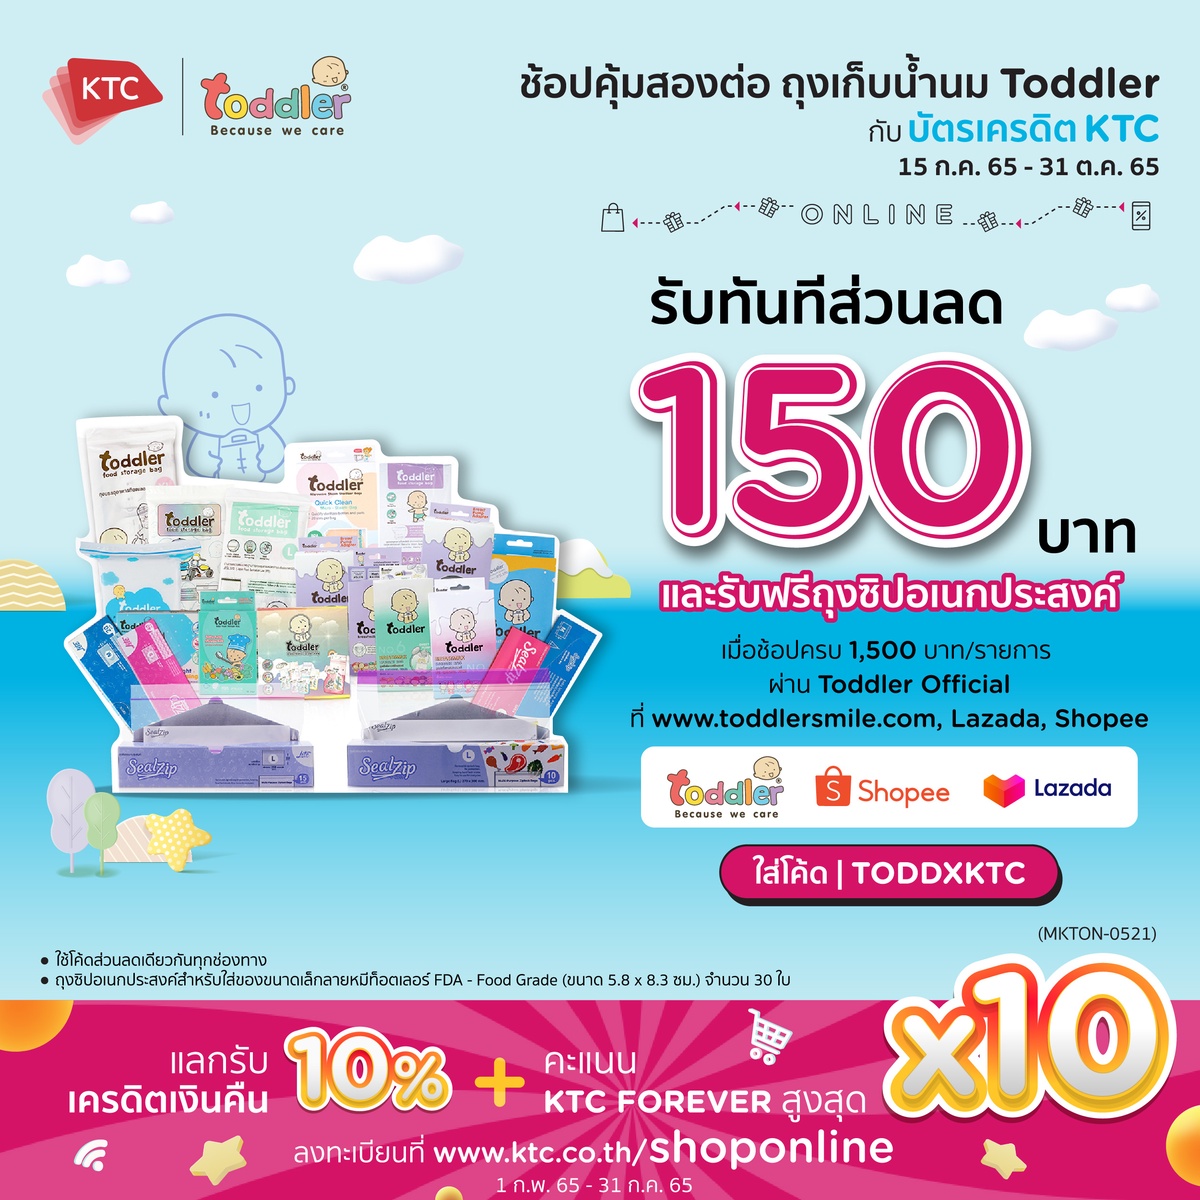 KTC-Toddler pleases mothers by offering value deals and free Toddler multipurpose zipper bags for online